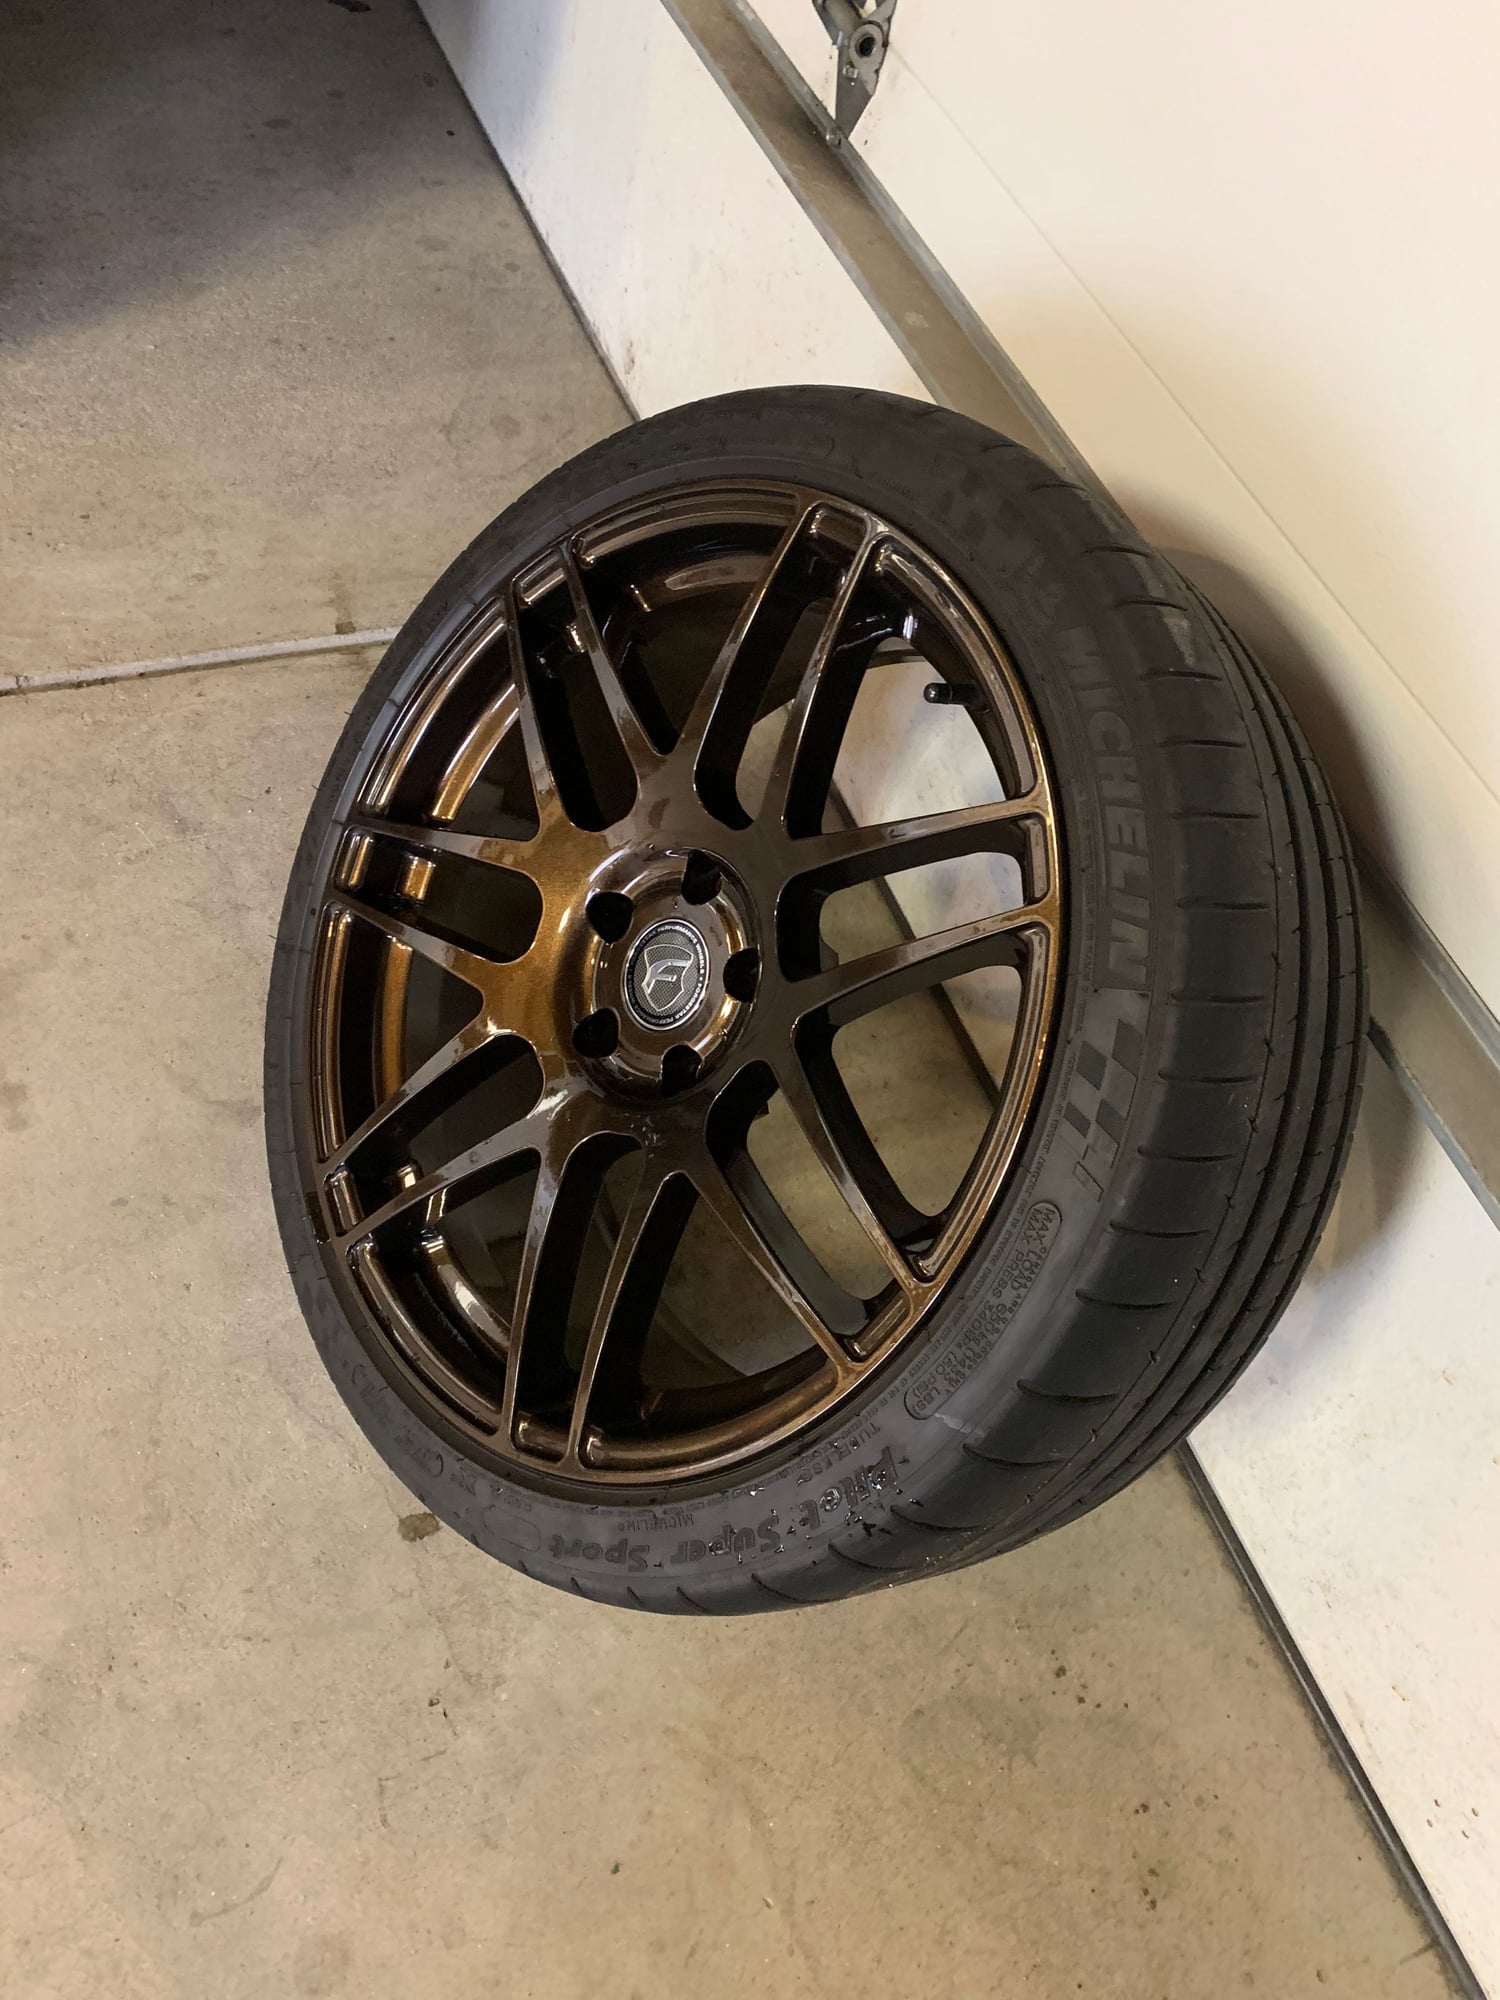 Wheels and Tires/Axles - 19" Forgestar F14 *Bronze Burst* Michelin Pilot Super Sport - Used - Harwood Heights, IL 60706, United States